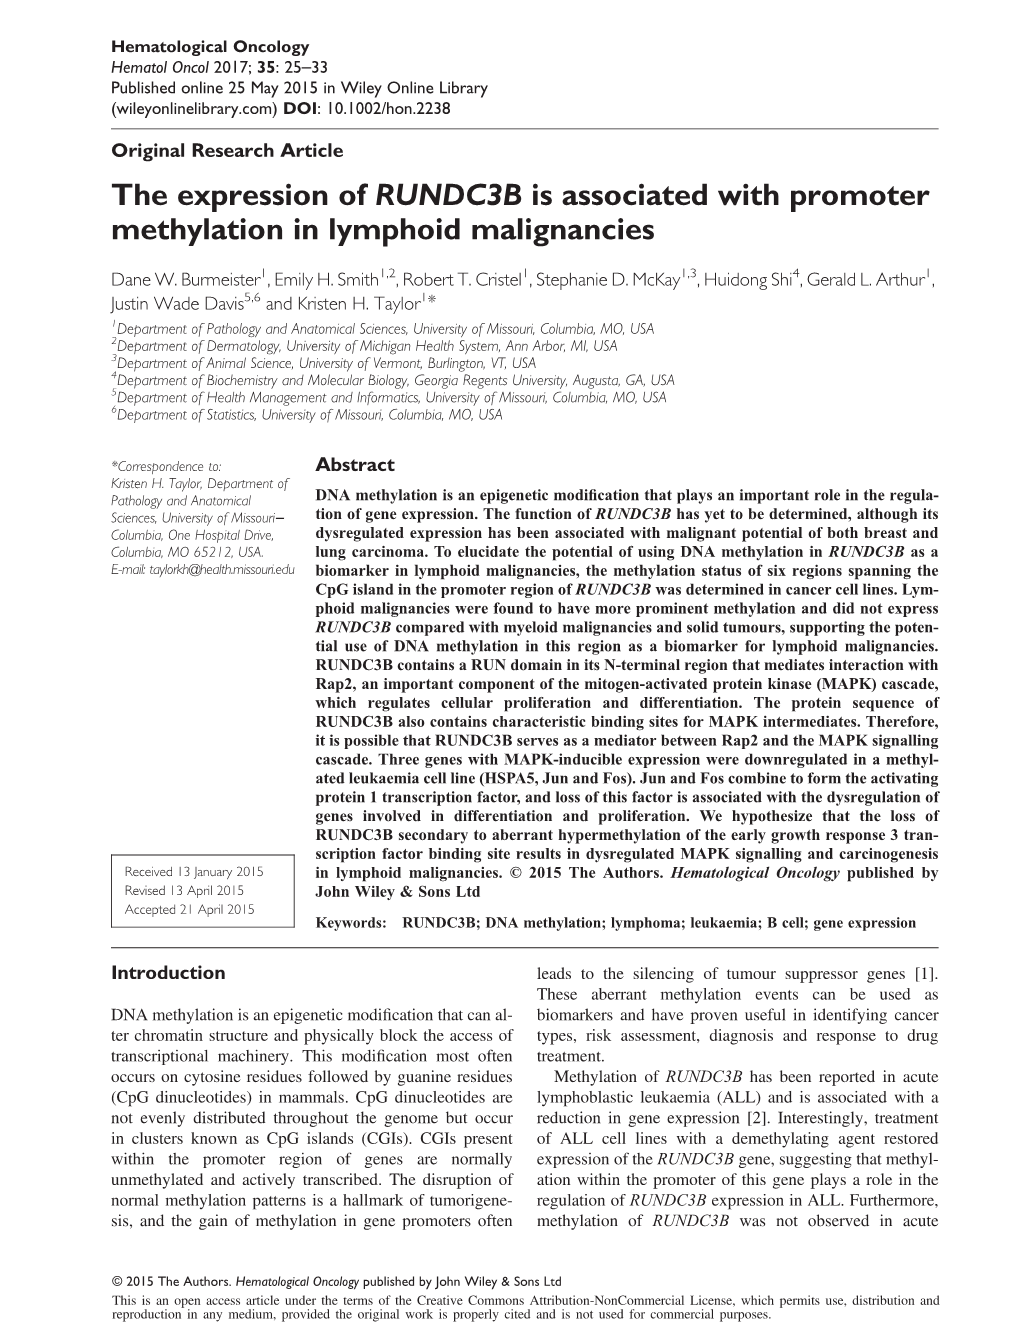 The Expression of RUNDC3B Is Associated with Promoter Methylation in Lymphoid Malignancies